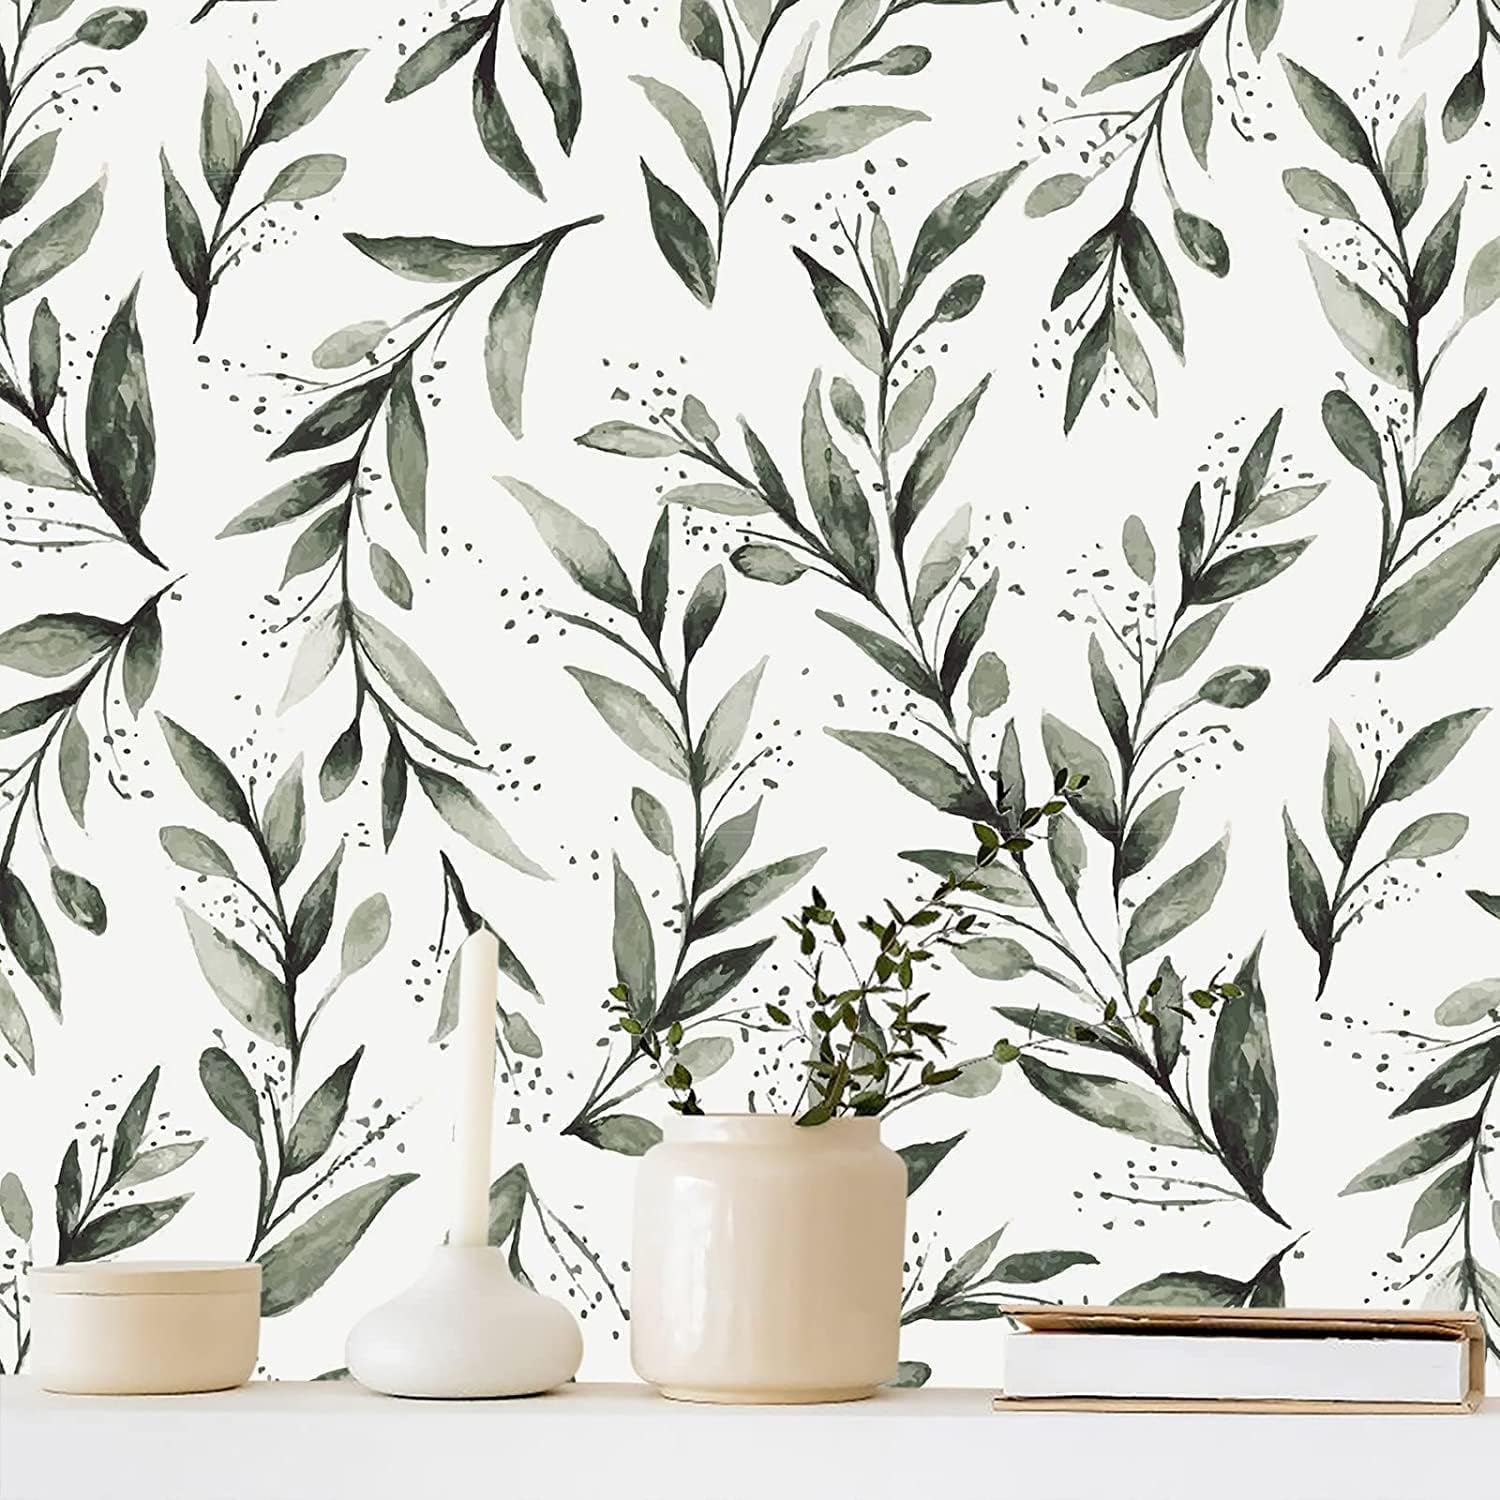 Beautiful Wallpaper for Any Room